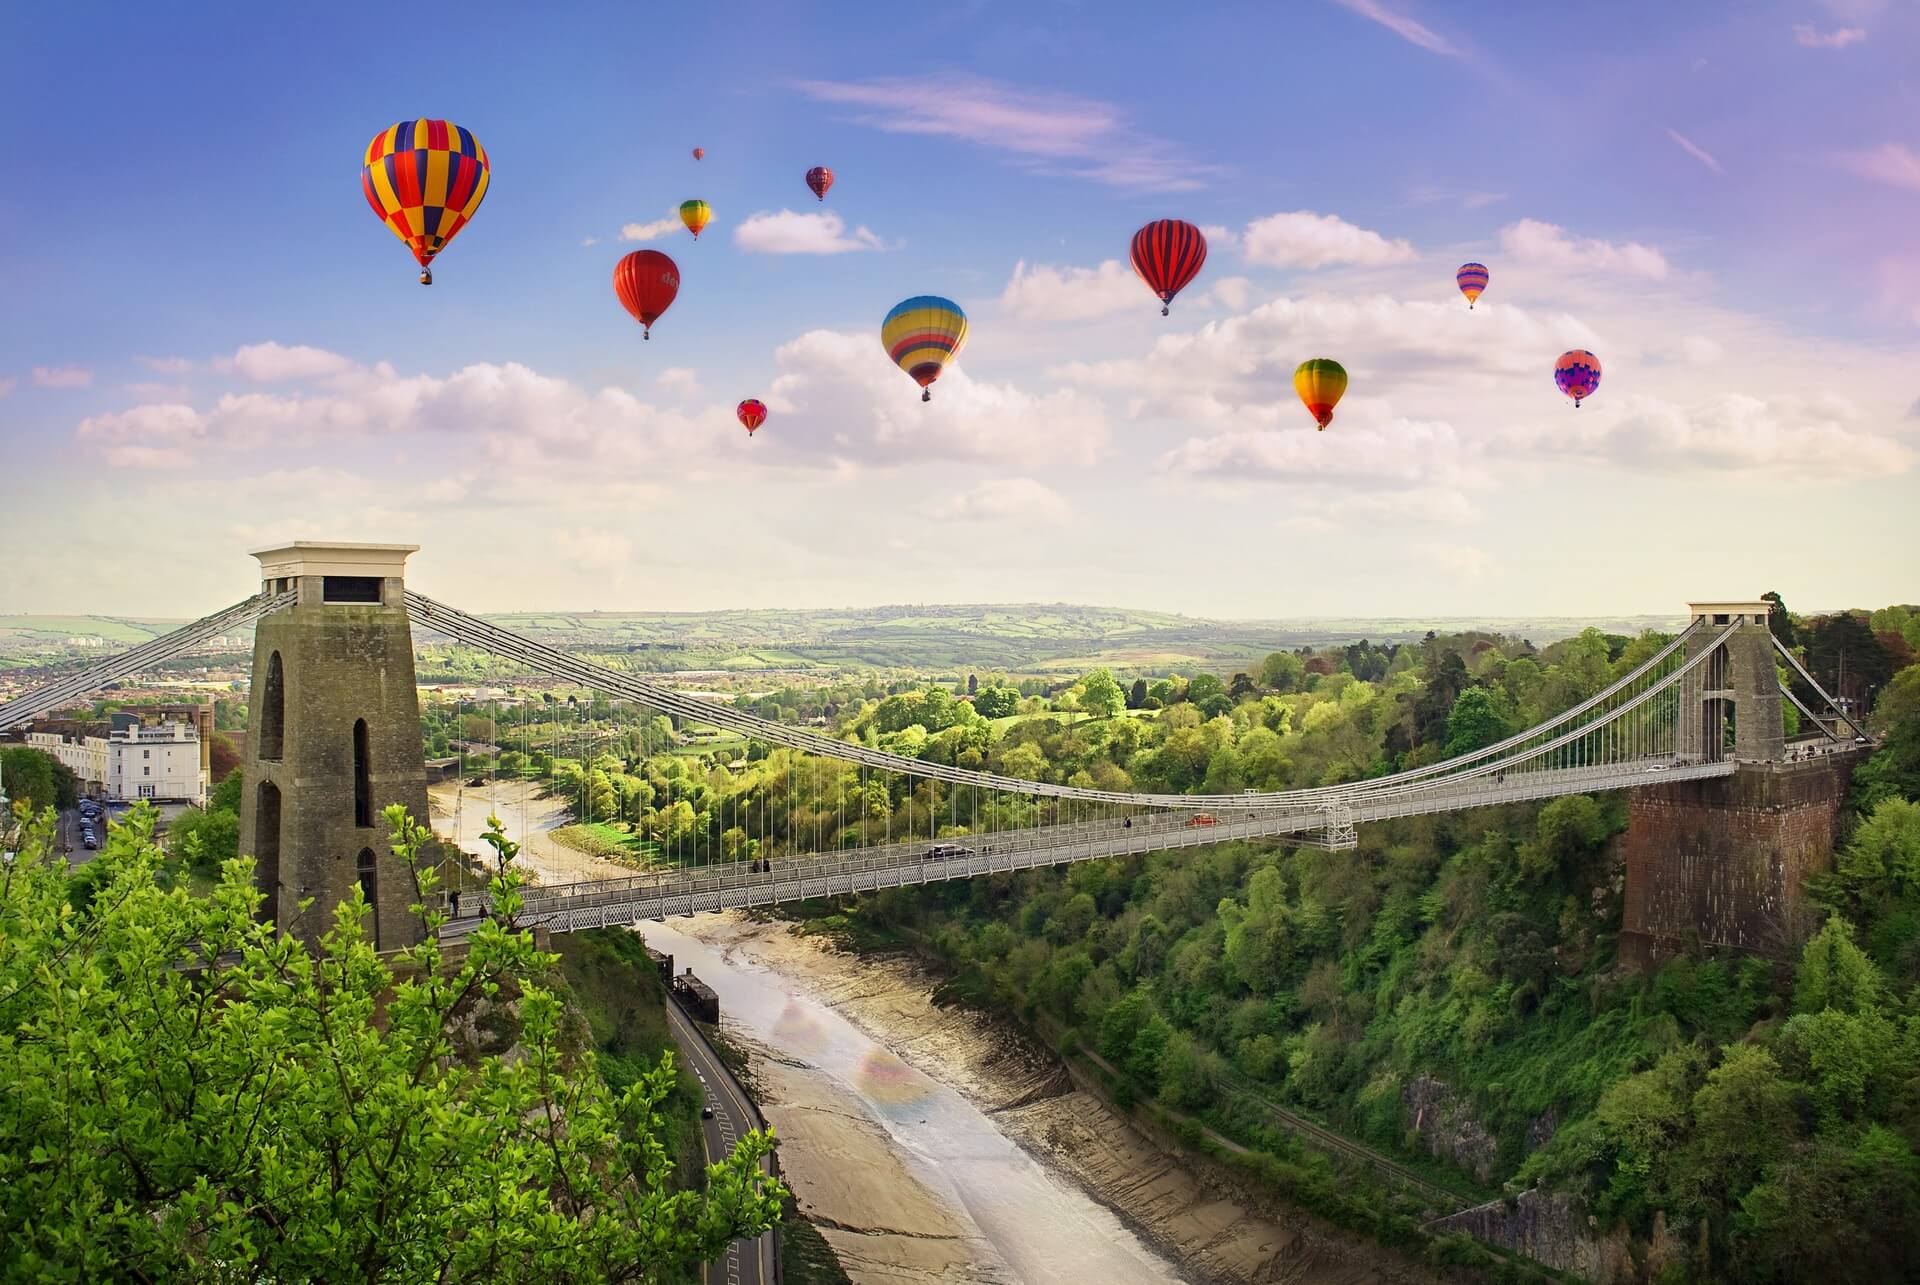 The World Famous Clifton Suspension Bridge, situated in Bristol, UK.During the annual balloon fiesta.
